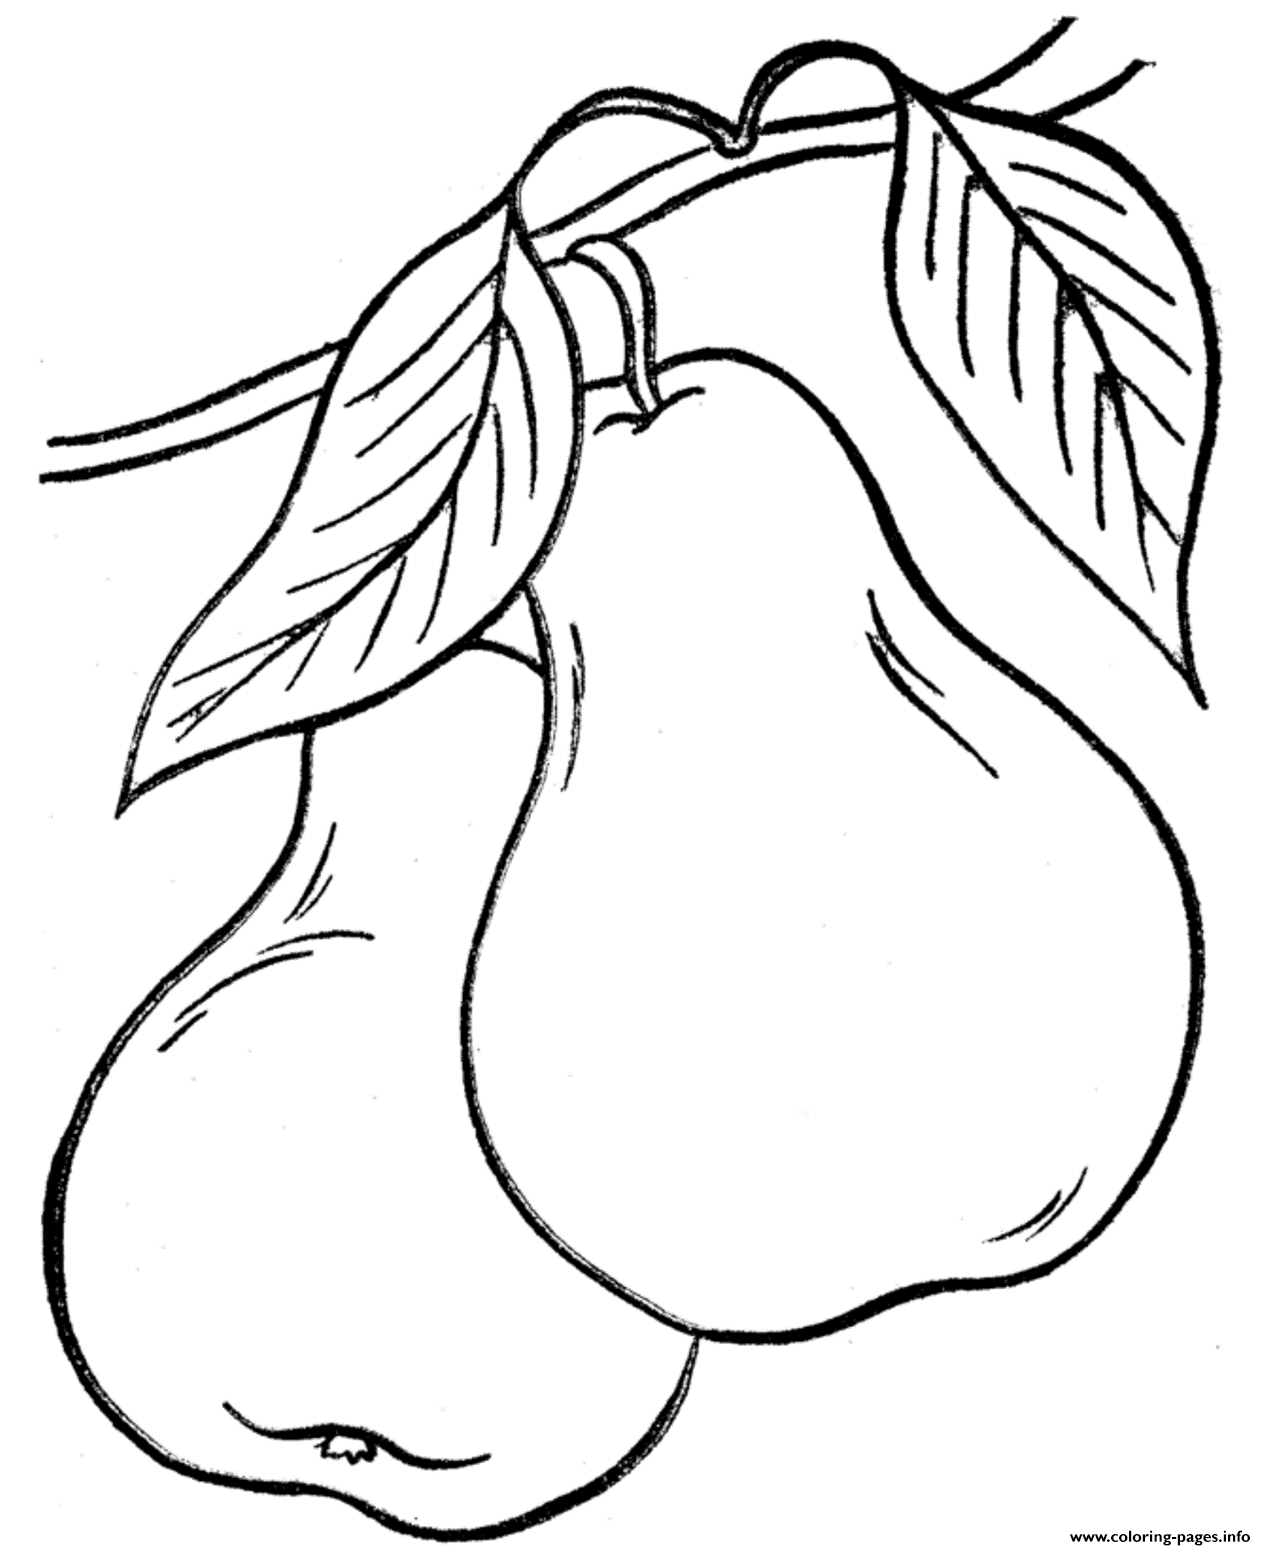 Fruit S Pears2389 coloring